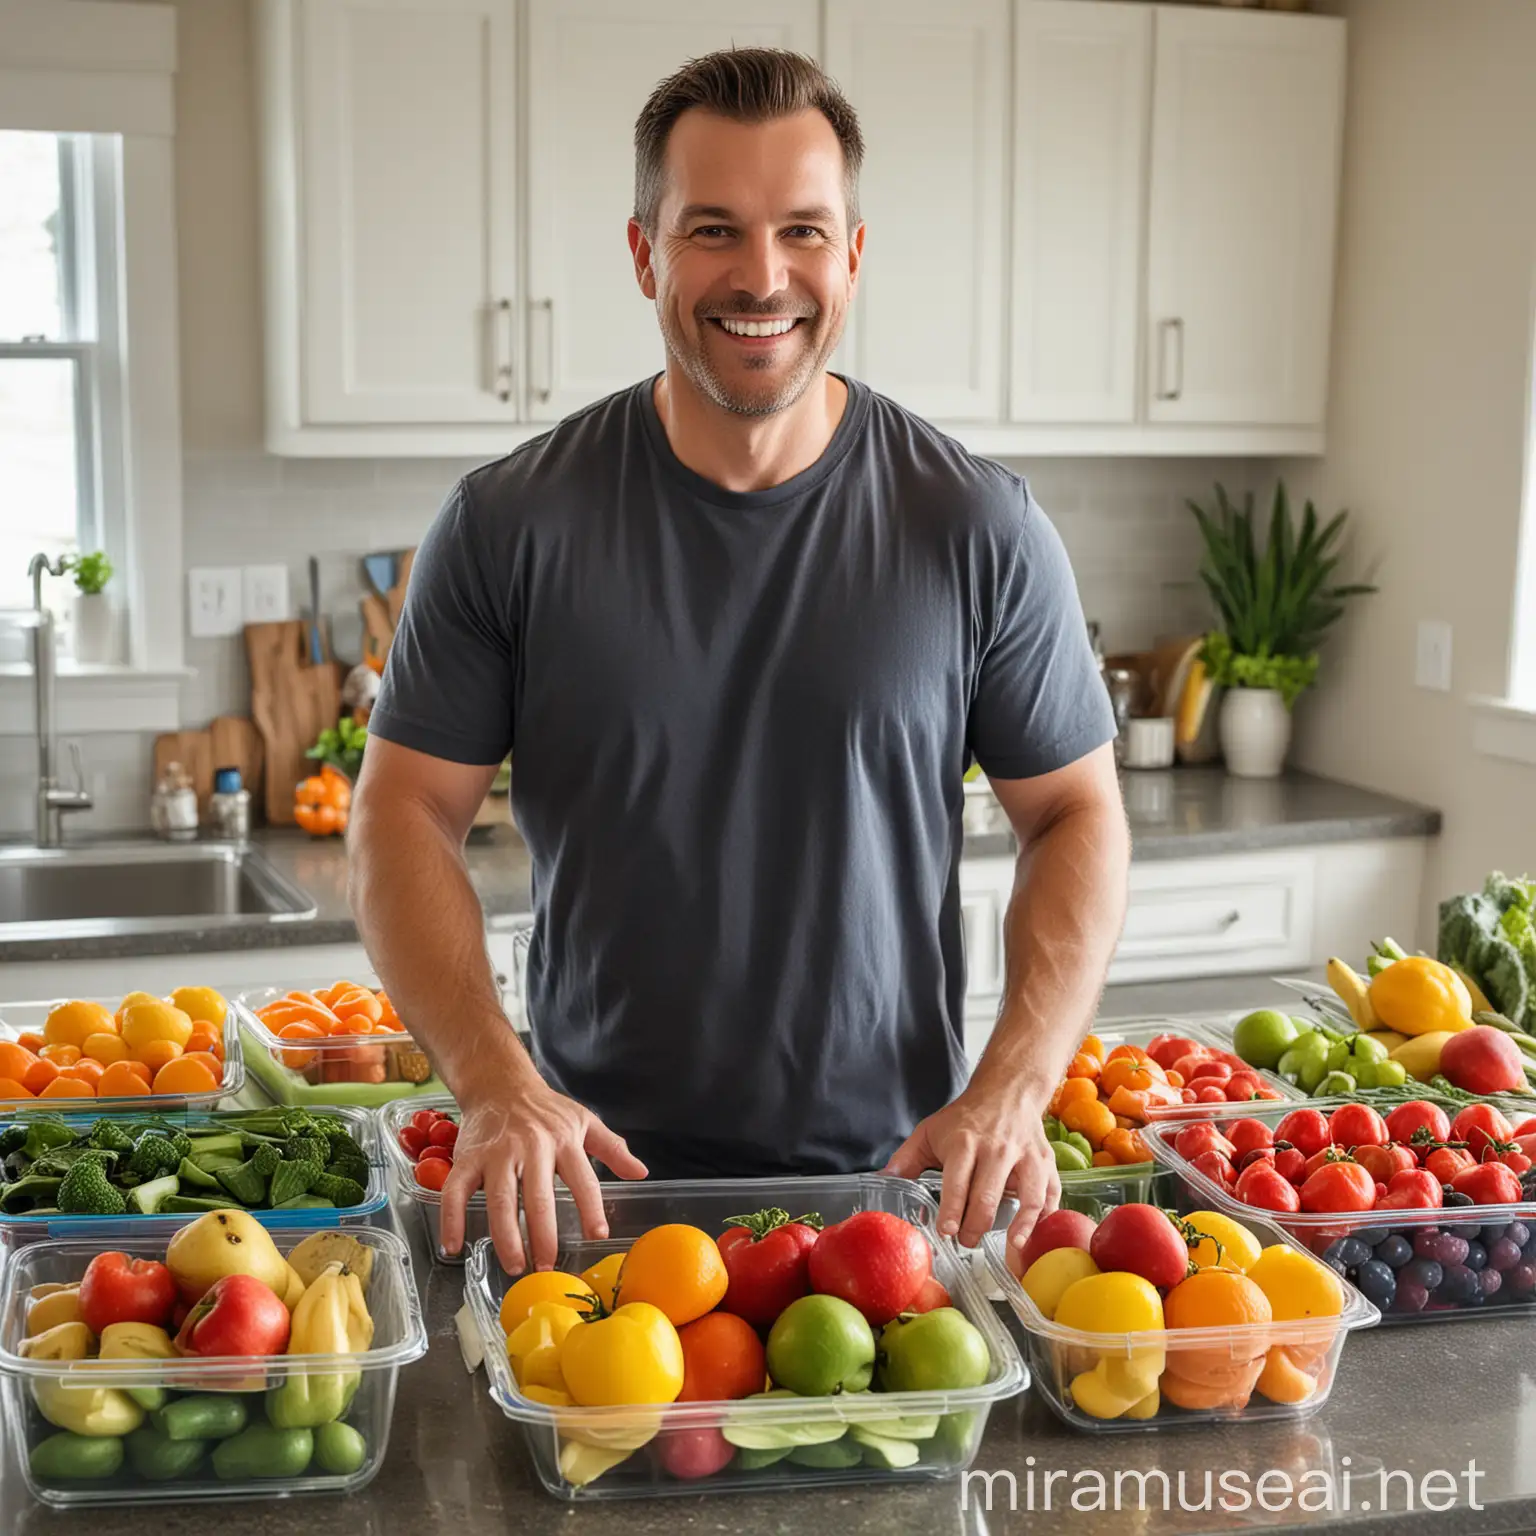 Smiling Dad Preparing Colorful Nutritious Meals in Kitchen